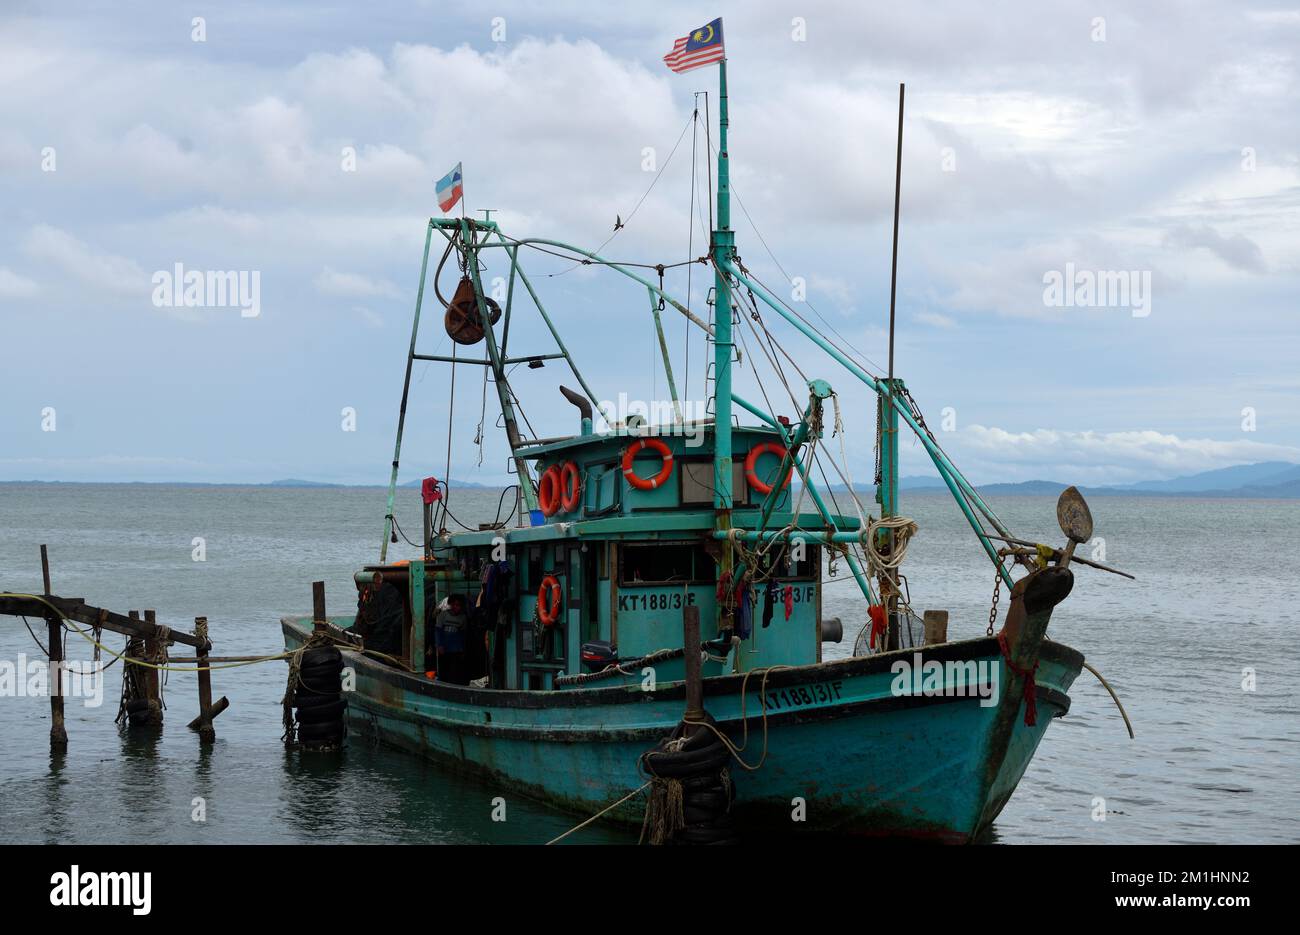 A fishing boat operated by the indigenous Rungus people in Kudat harbour on the Sulu Sea. Sabah, Borneo, Malaysia. Stock Photo